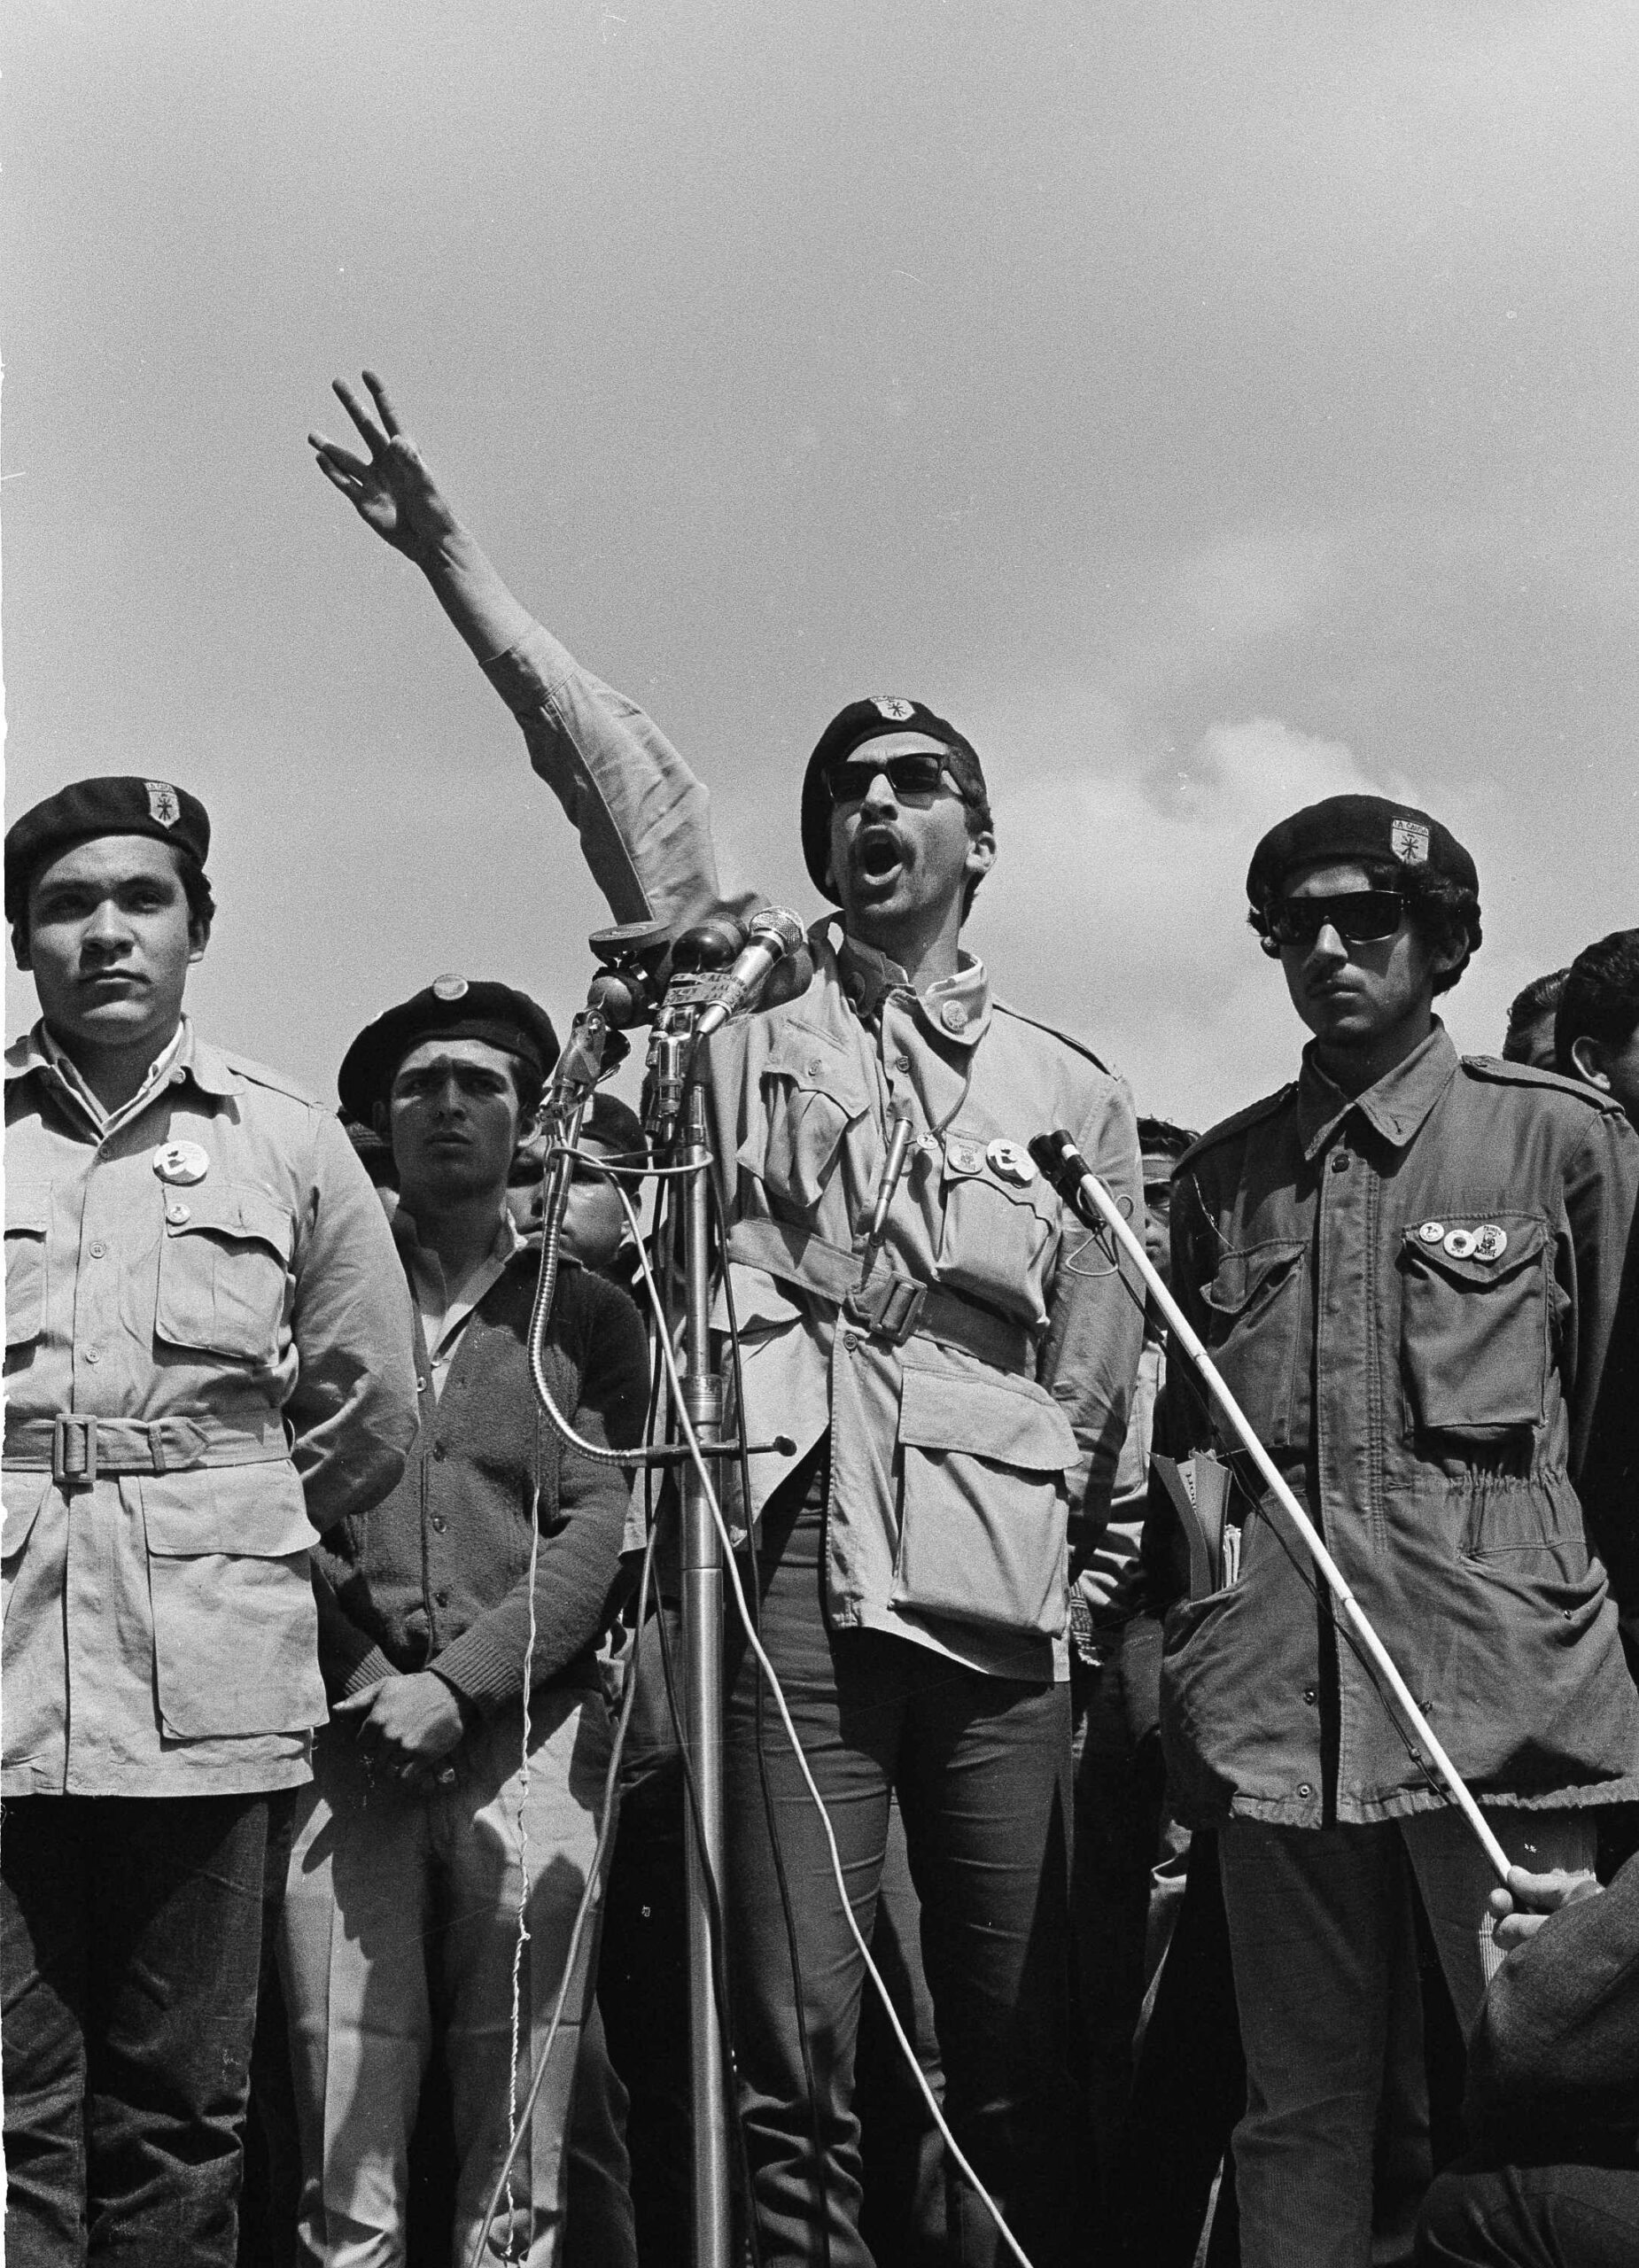 A co-founder of the Brown Berets speaks at a microphone with one arm raised